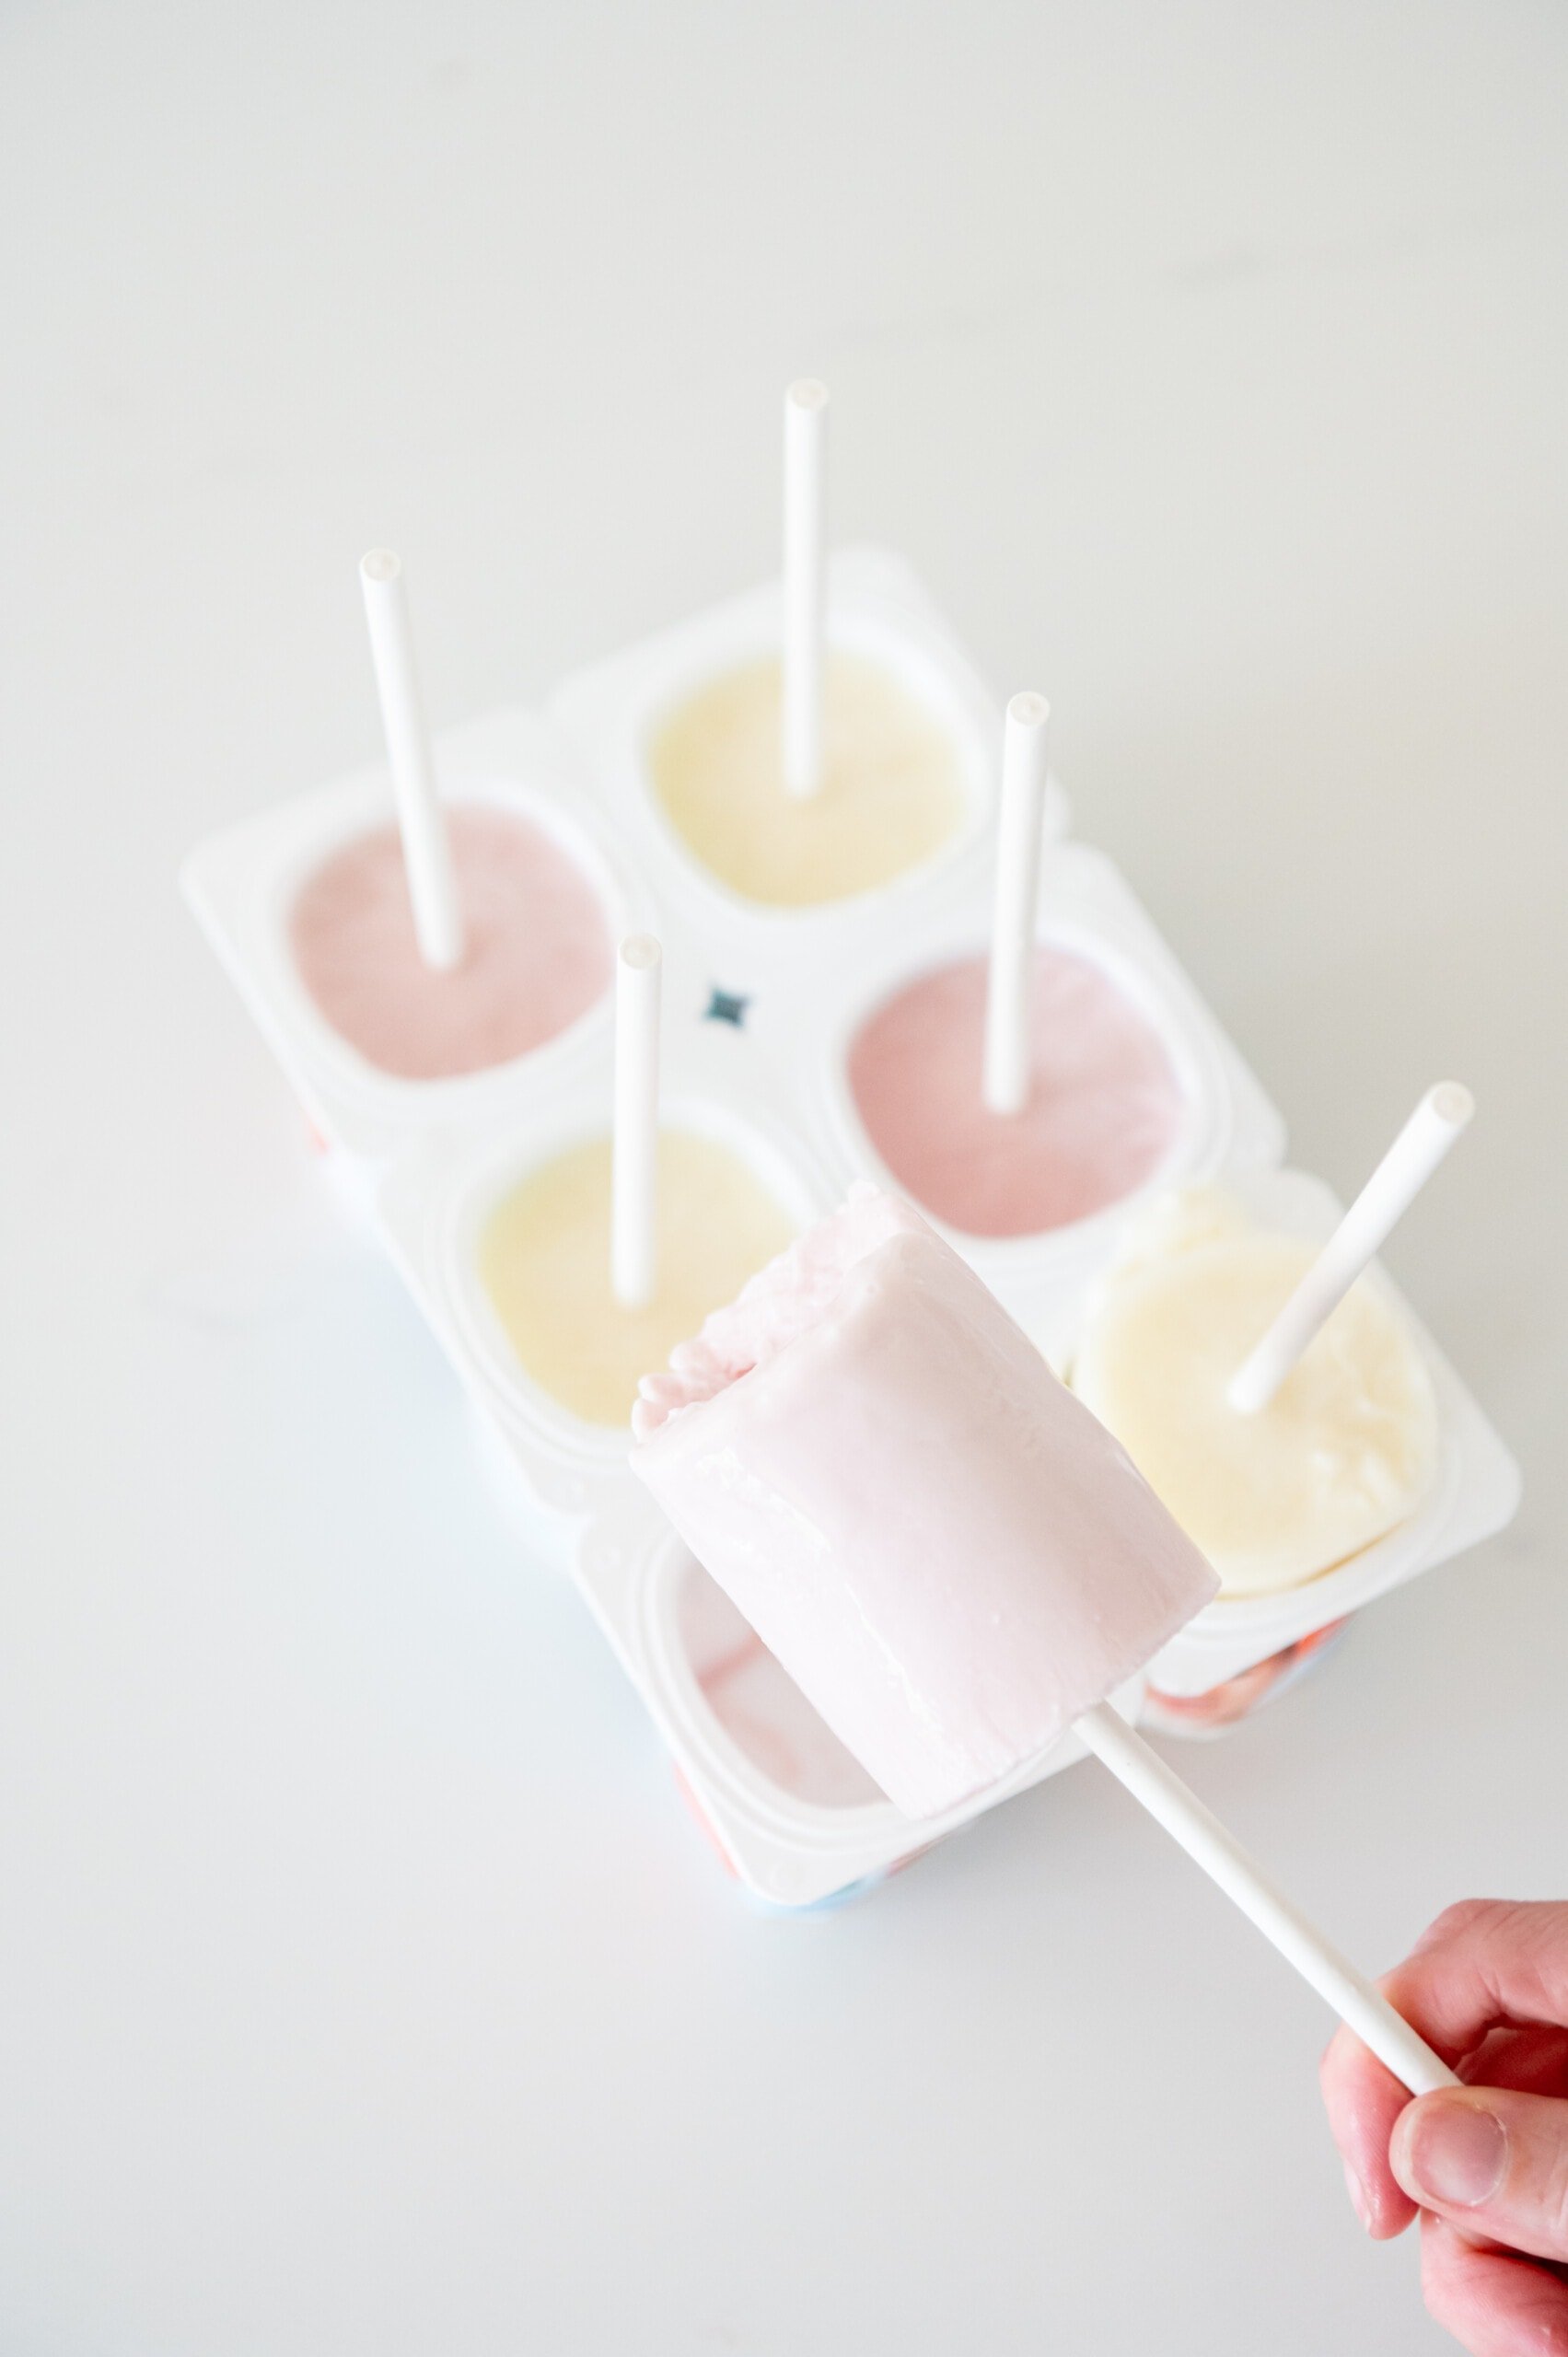 A frozen yogurt pop with a tray of yogurt cups with cookie sticks in the background.